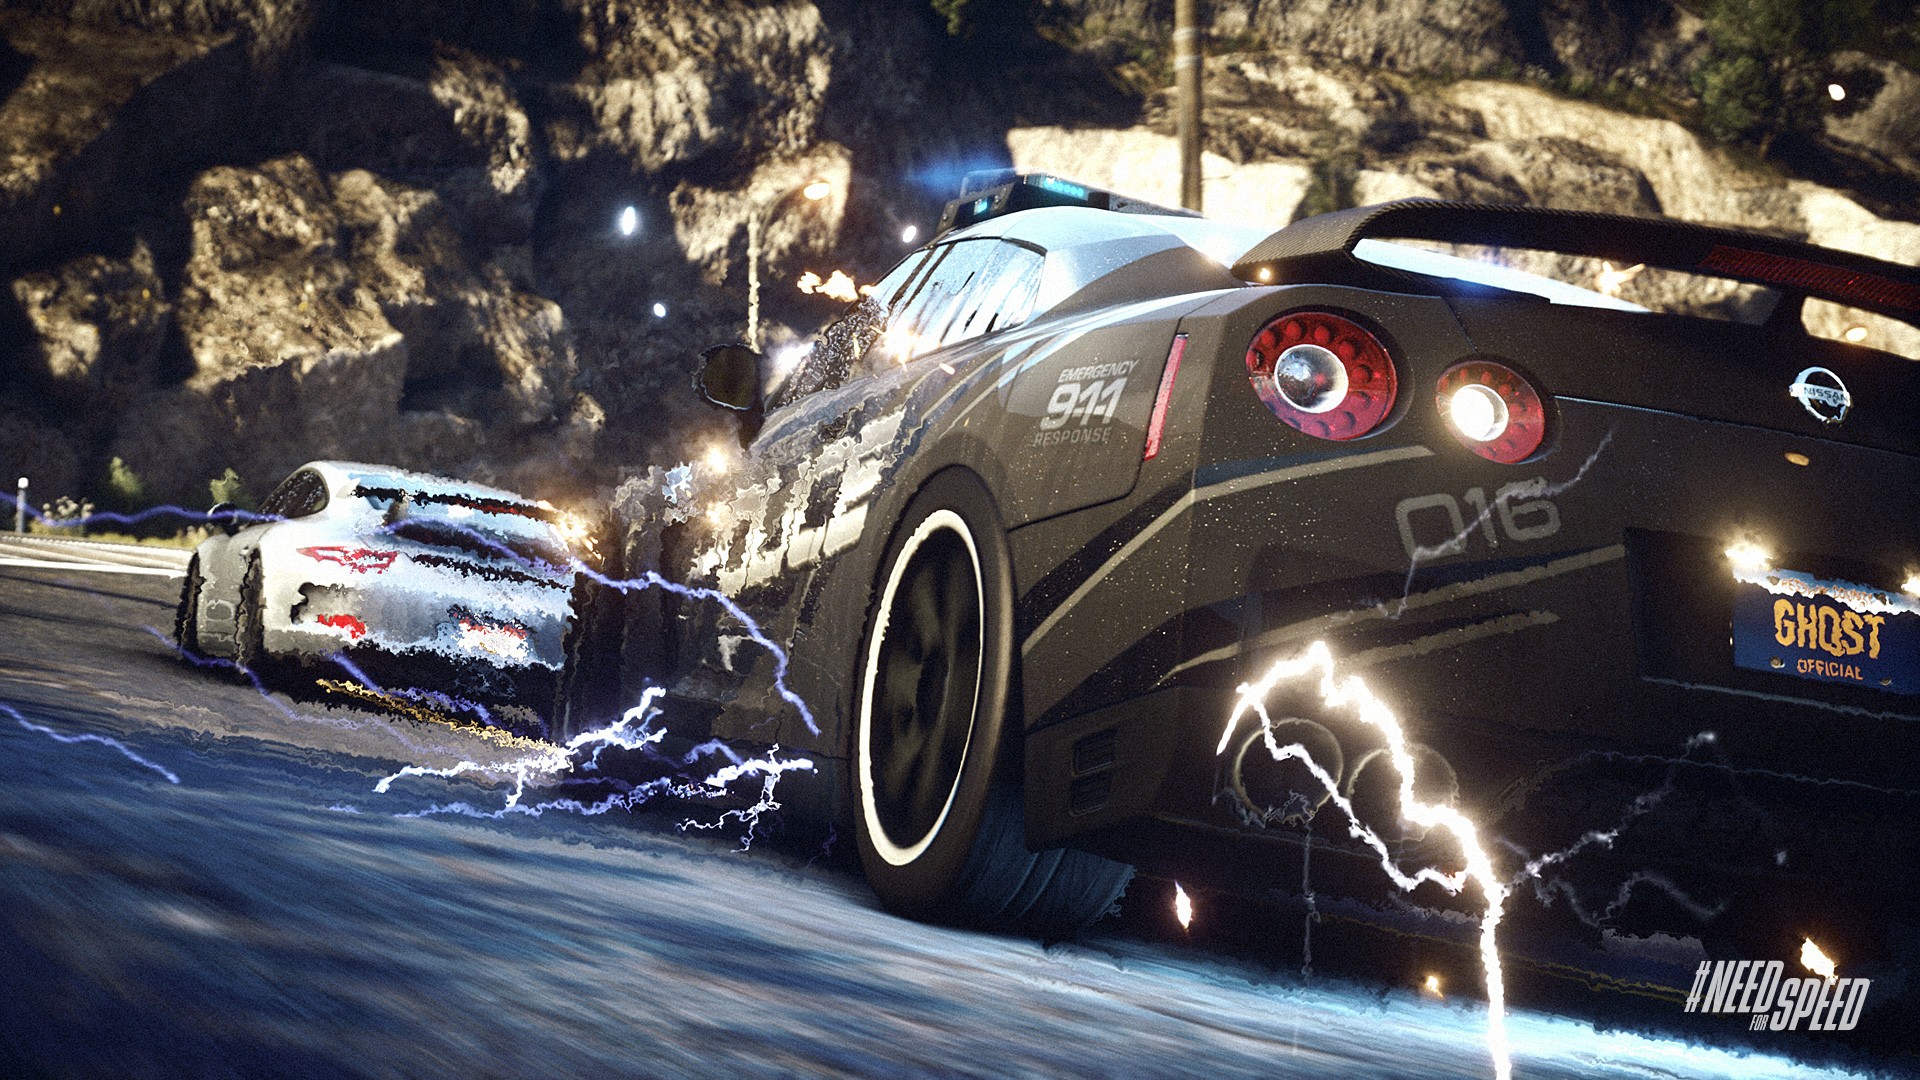 Free Need For Speed Wallpaper 40291 1920x1080 px